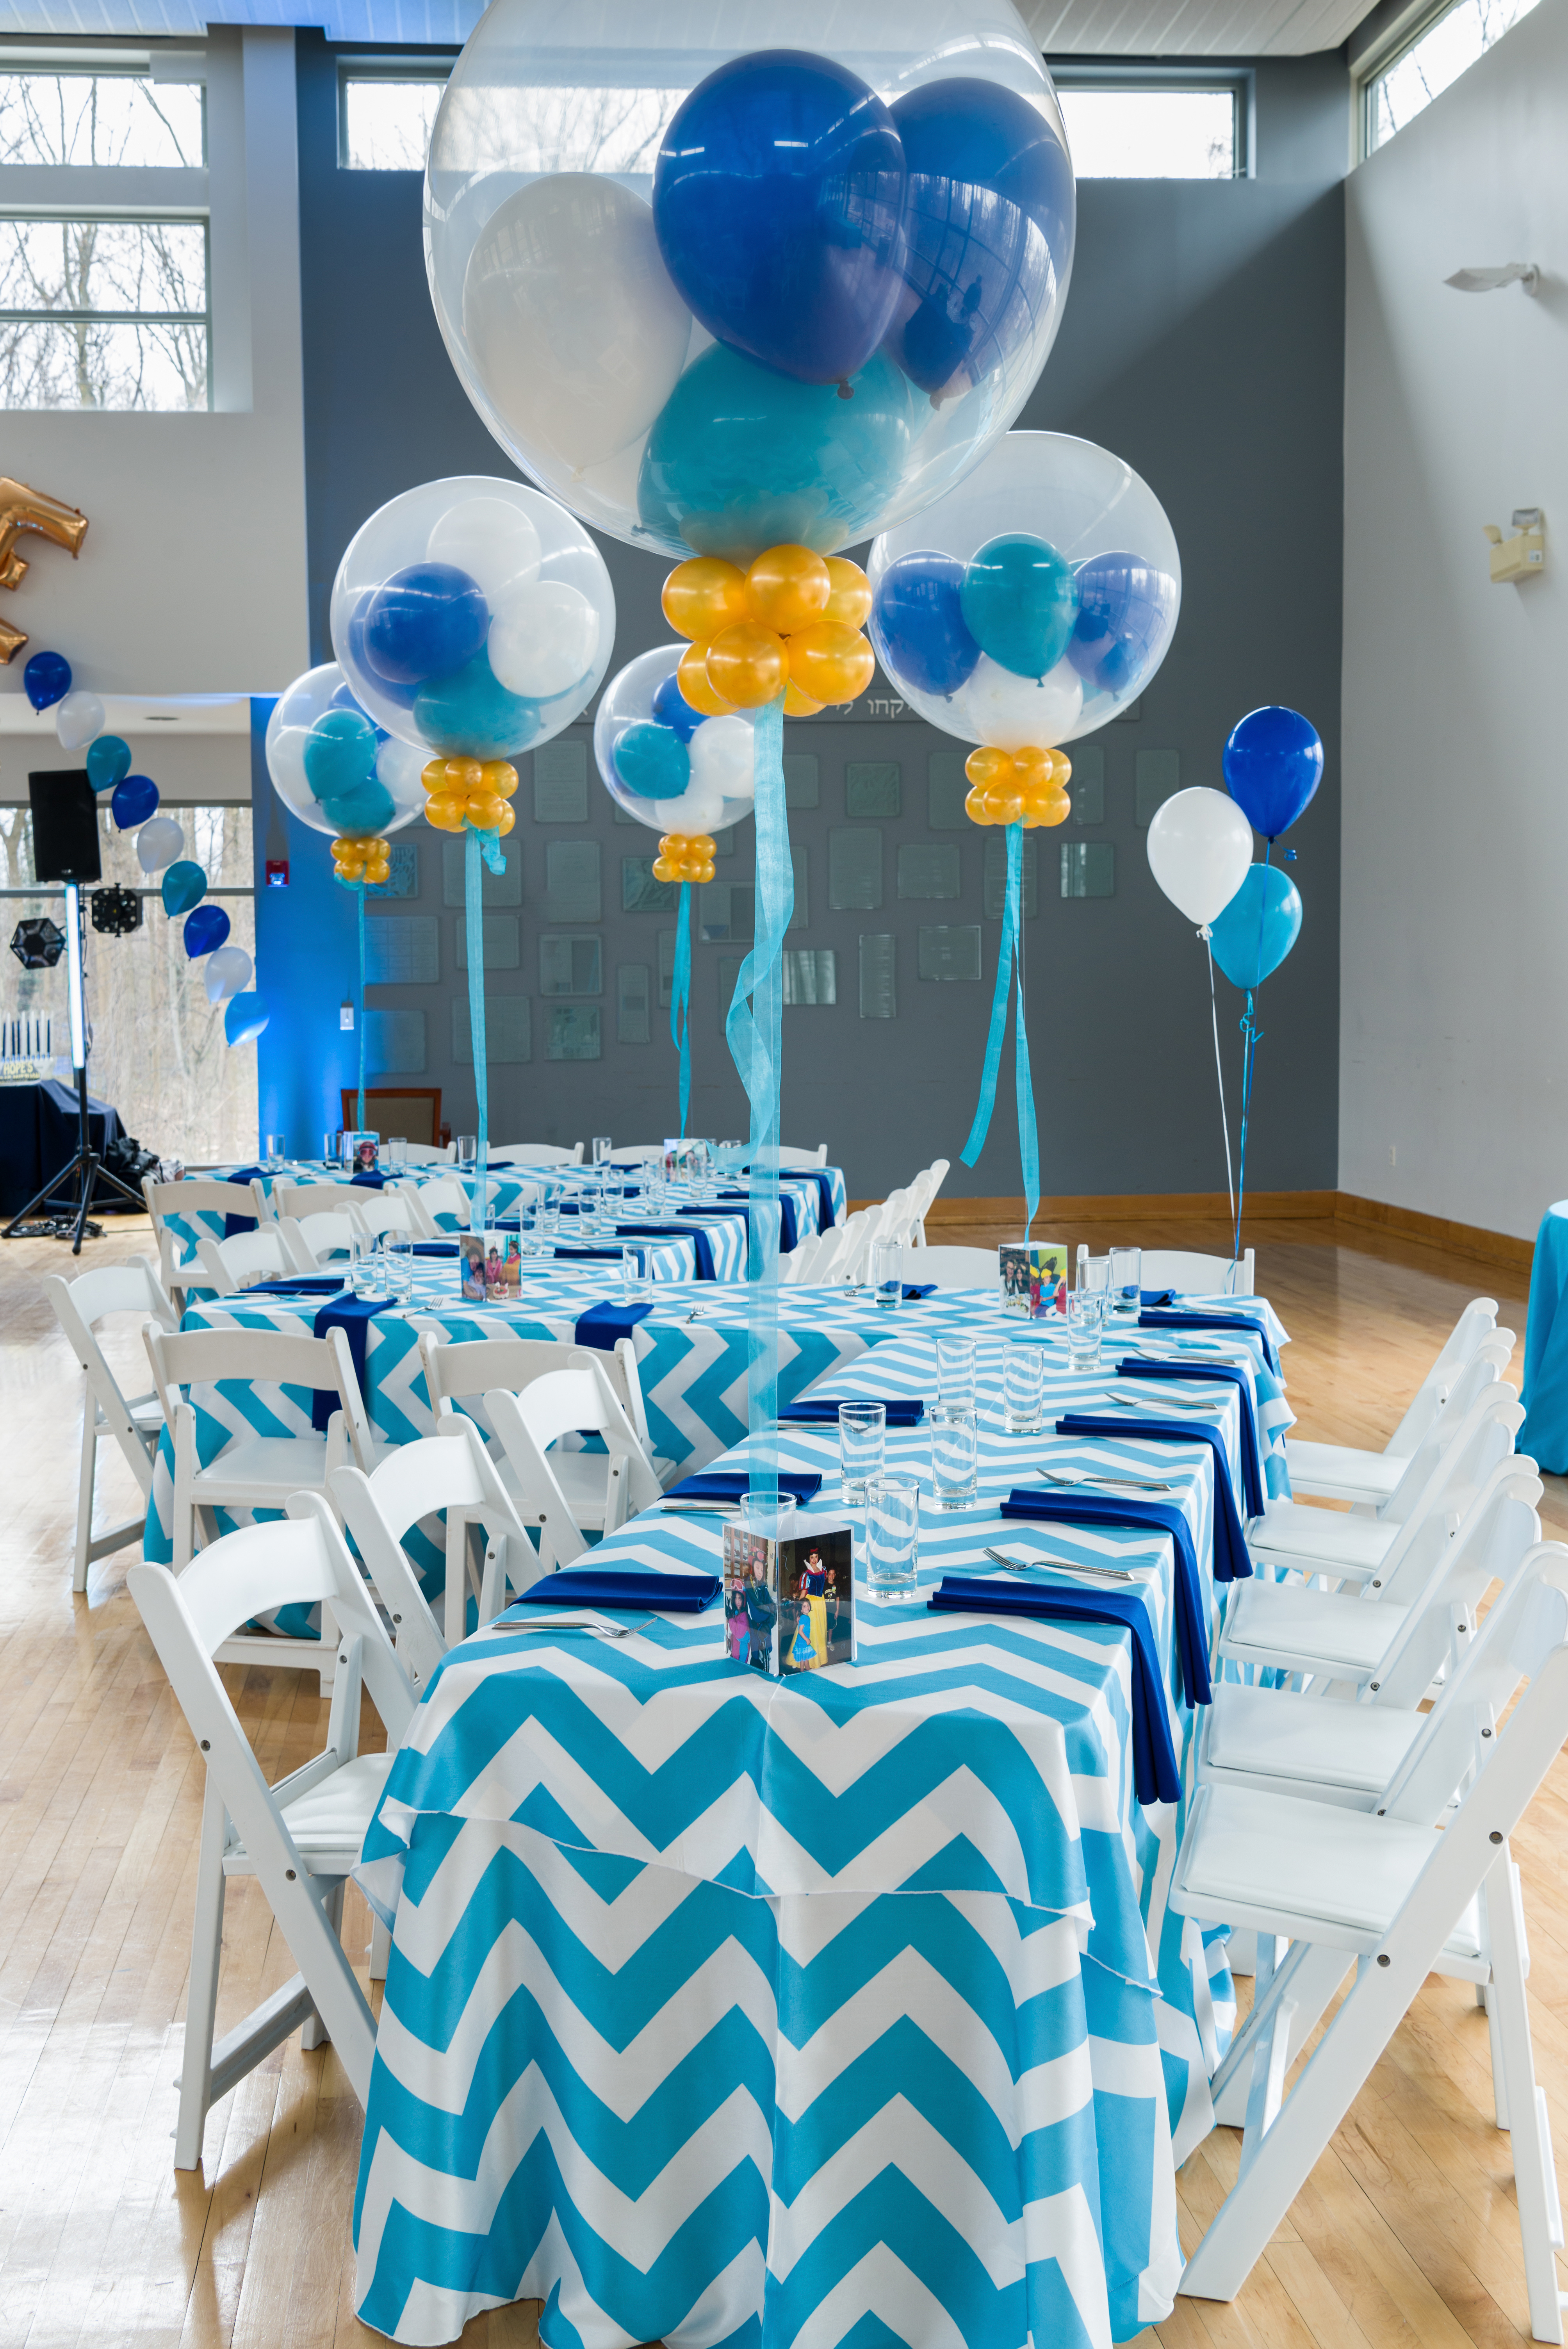 Hope's teal and blue Bat Mitzvah party at Temple Rodef Shalom in Falls Church, Virginia with balloons, a mirror photo booth and chevron. | Pop Color Events | Adding a Pop of Color to Bar & Bat Mitzvahs in DC, MD & VA | Photo by Greg Land Photography